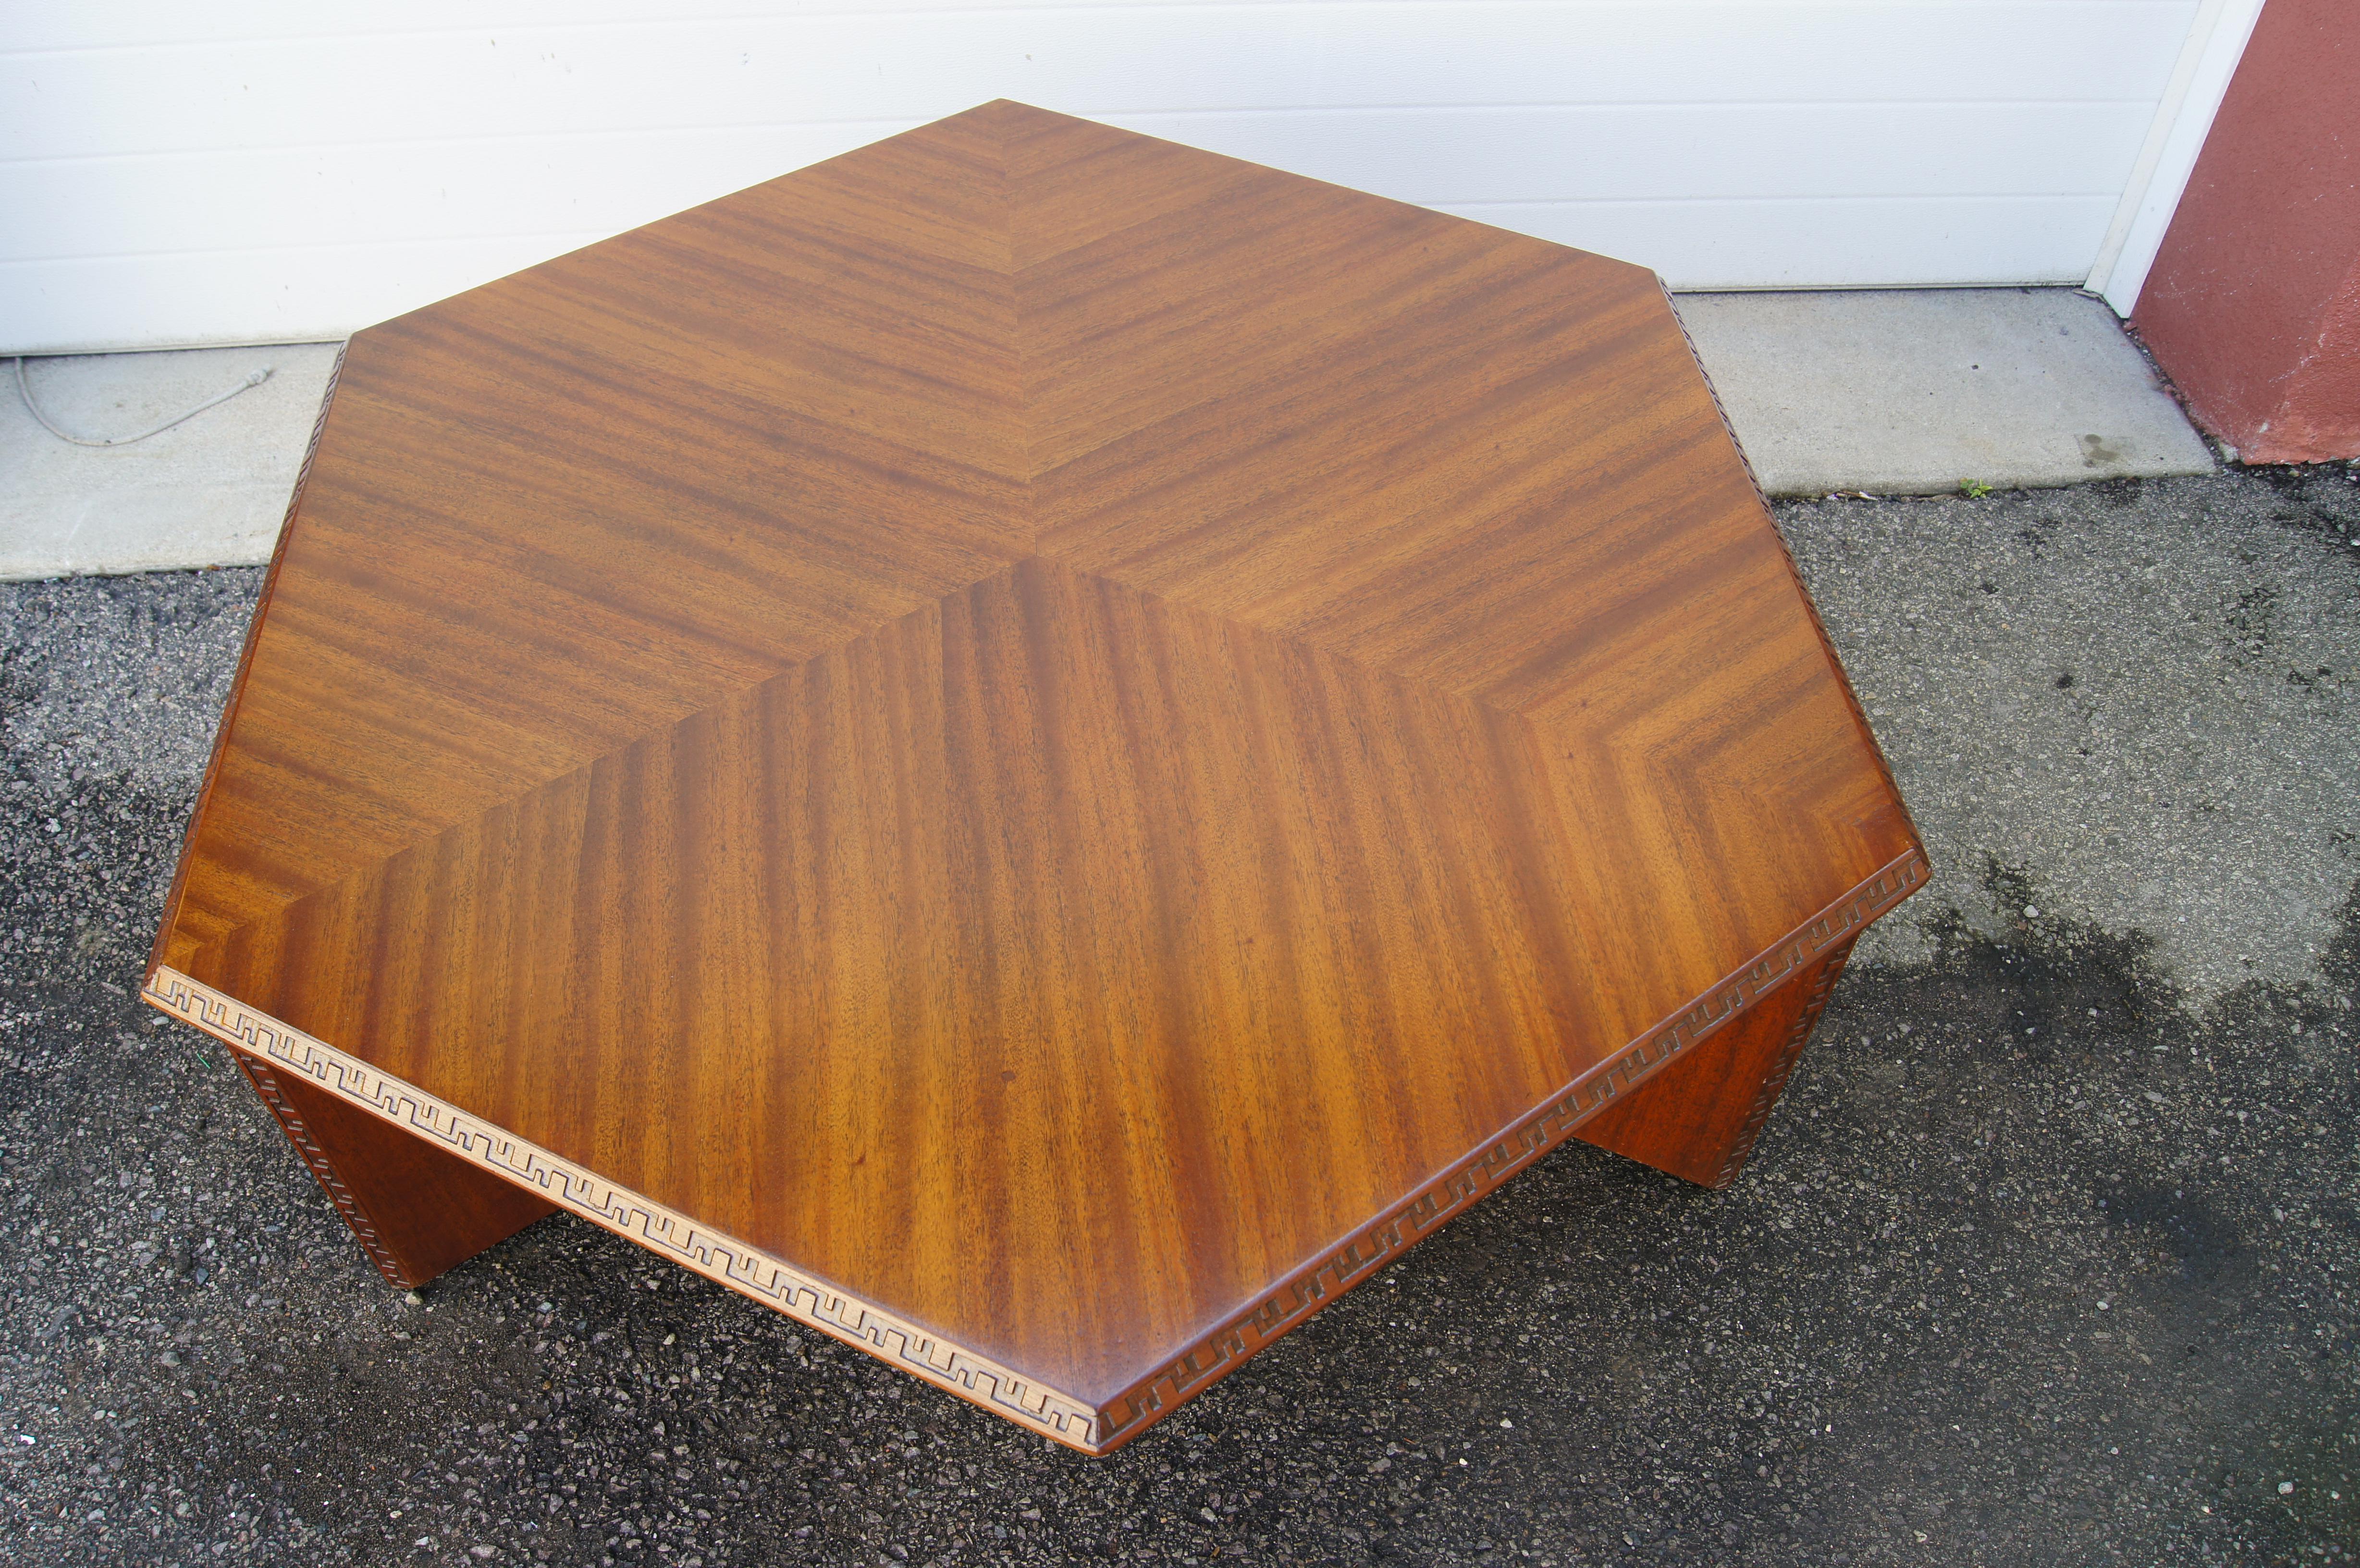 Carved Hexagonal Taliesin Coffee Table by Frank Lloyd Wright for Heritage-Henredon For Sale